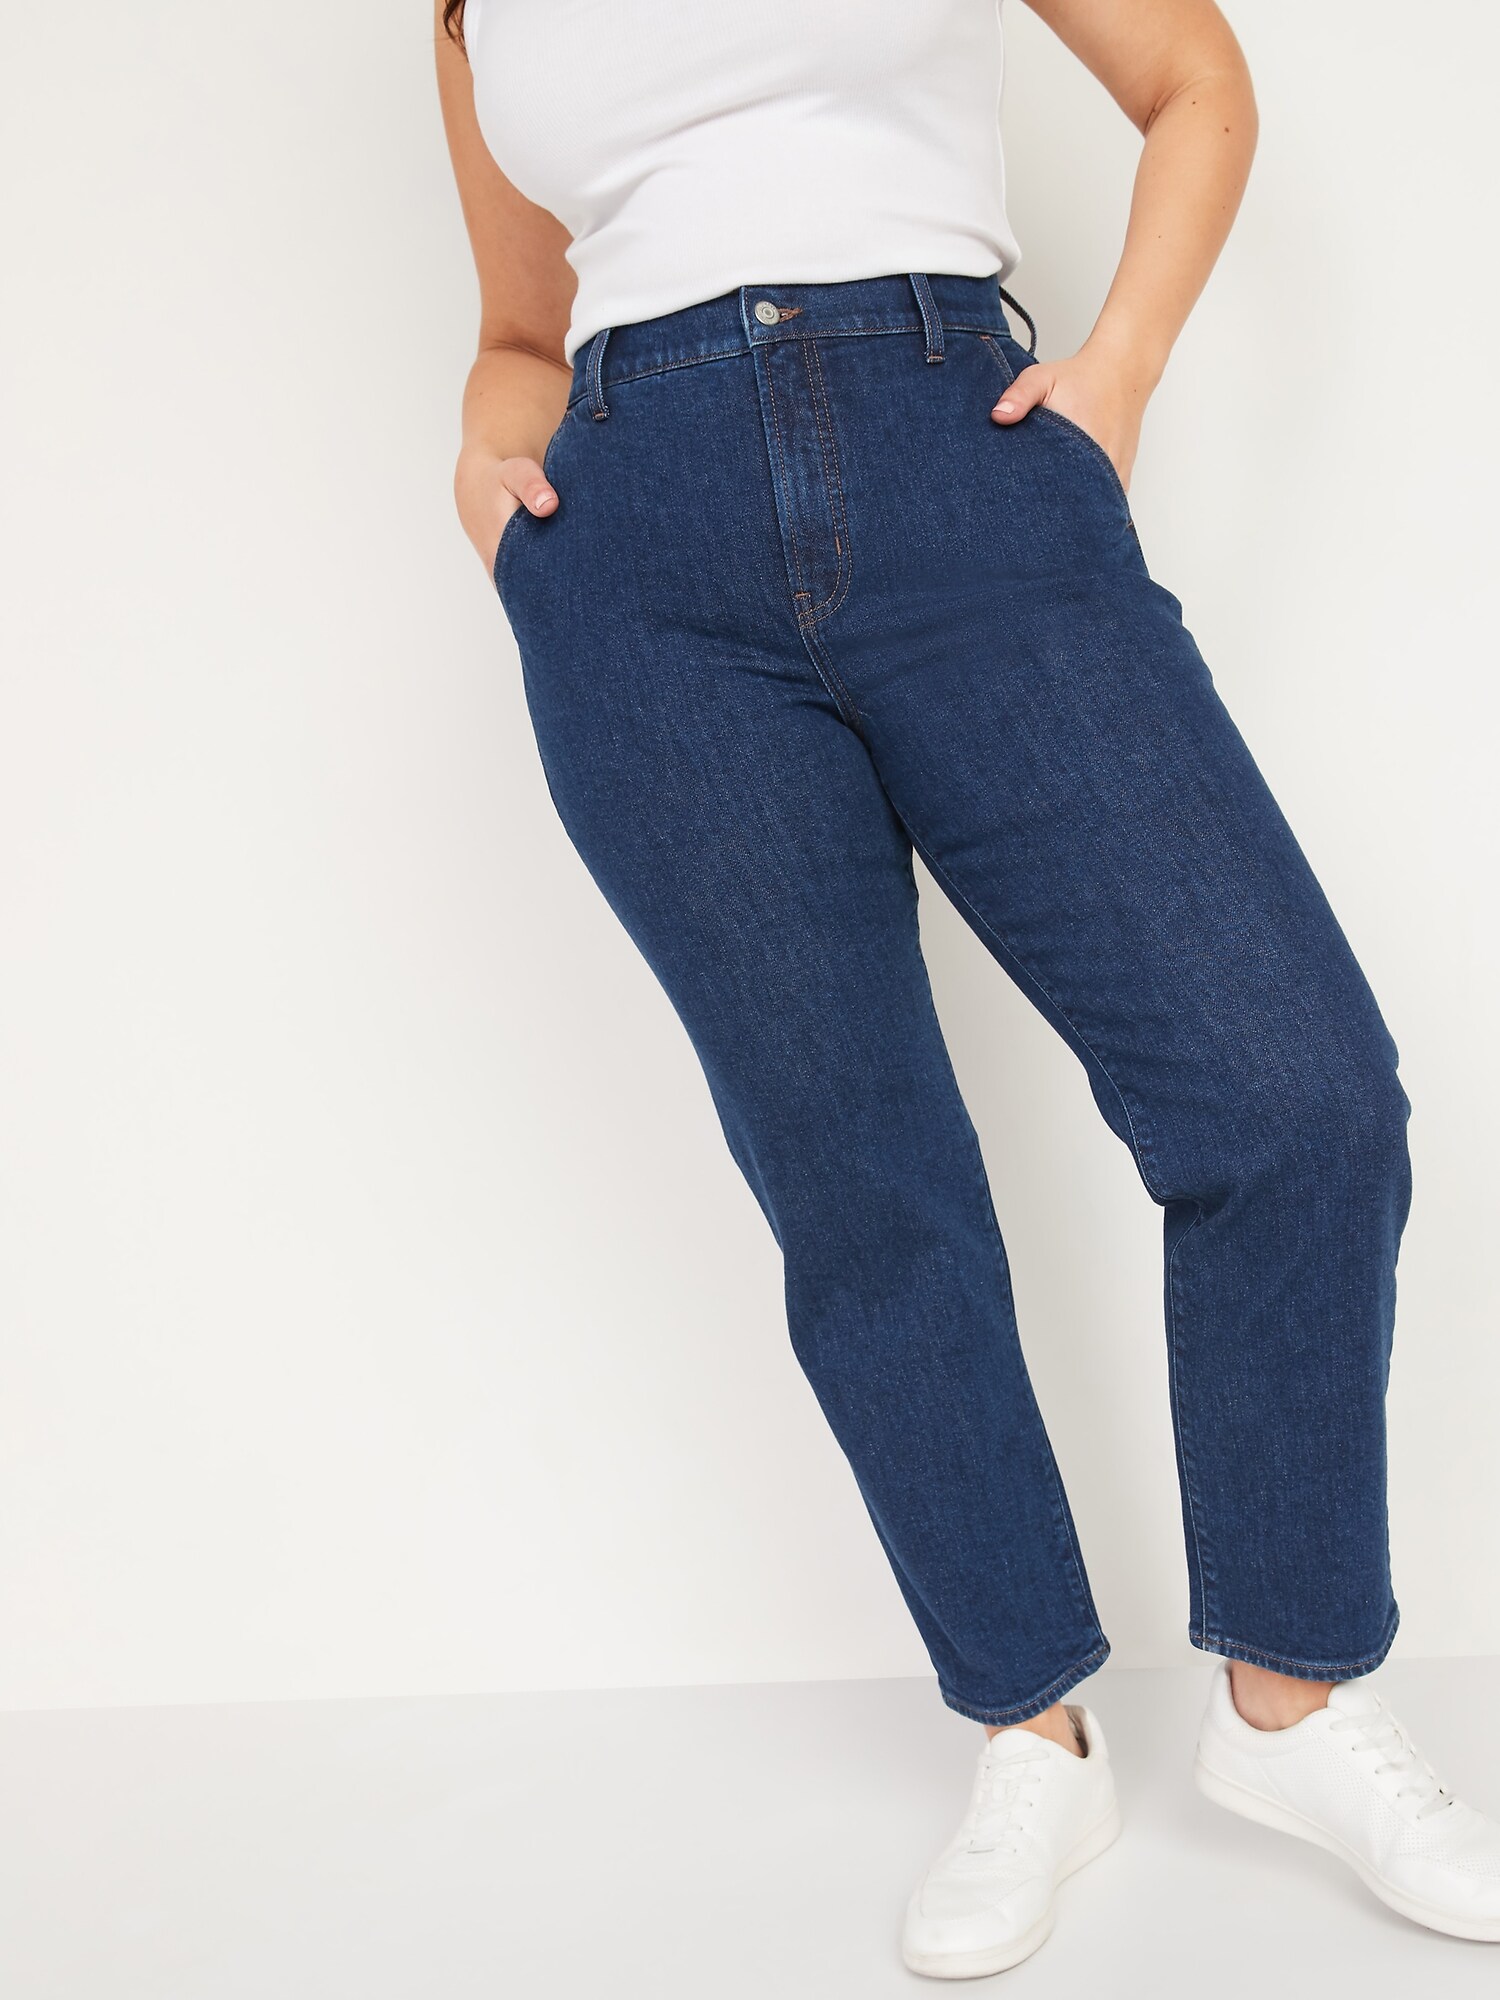 Extra High-Waisted Sky Hi Straight Workwear Jeans for Women